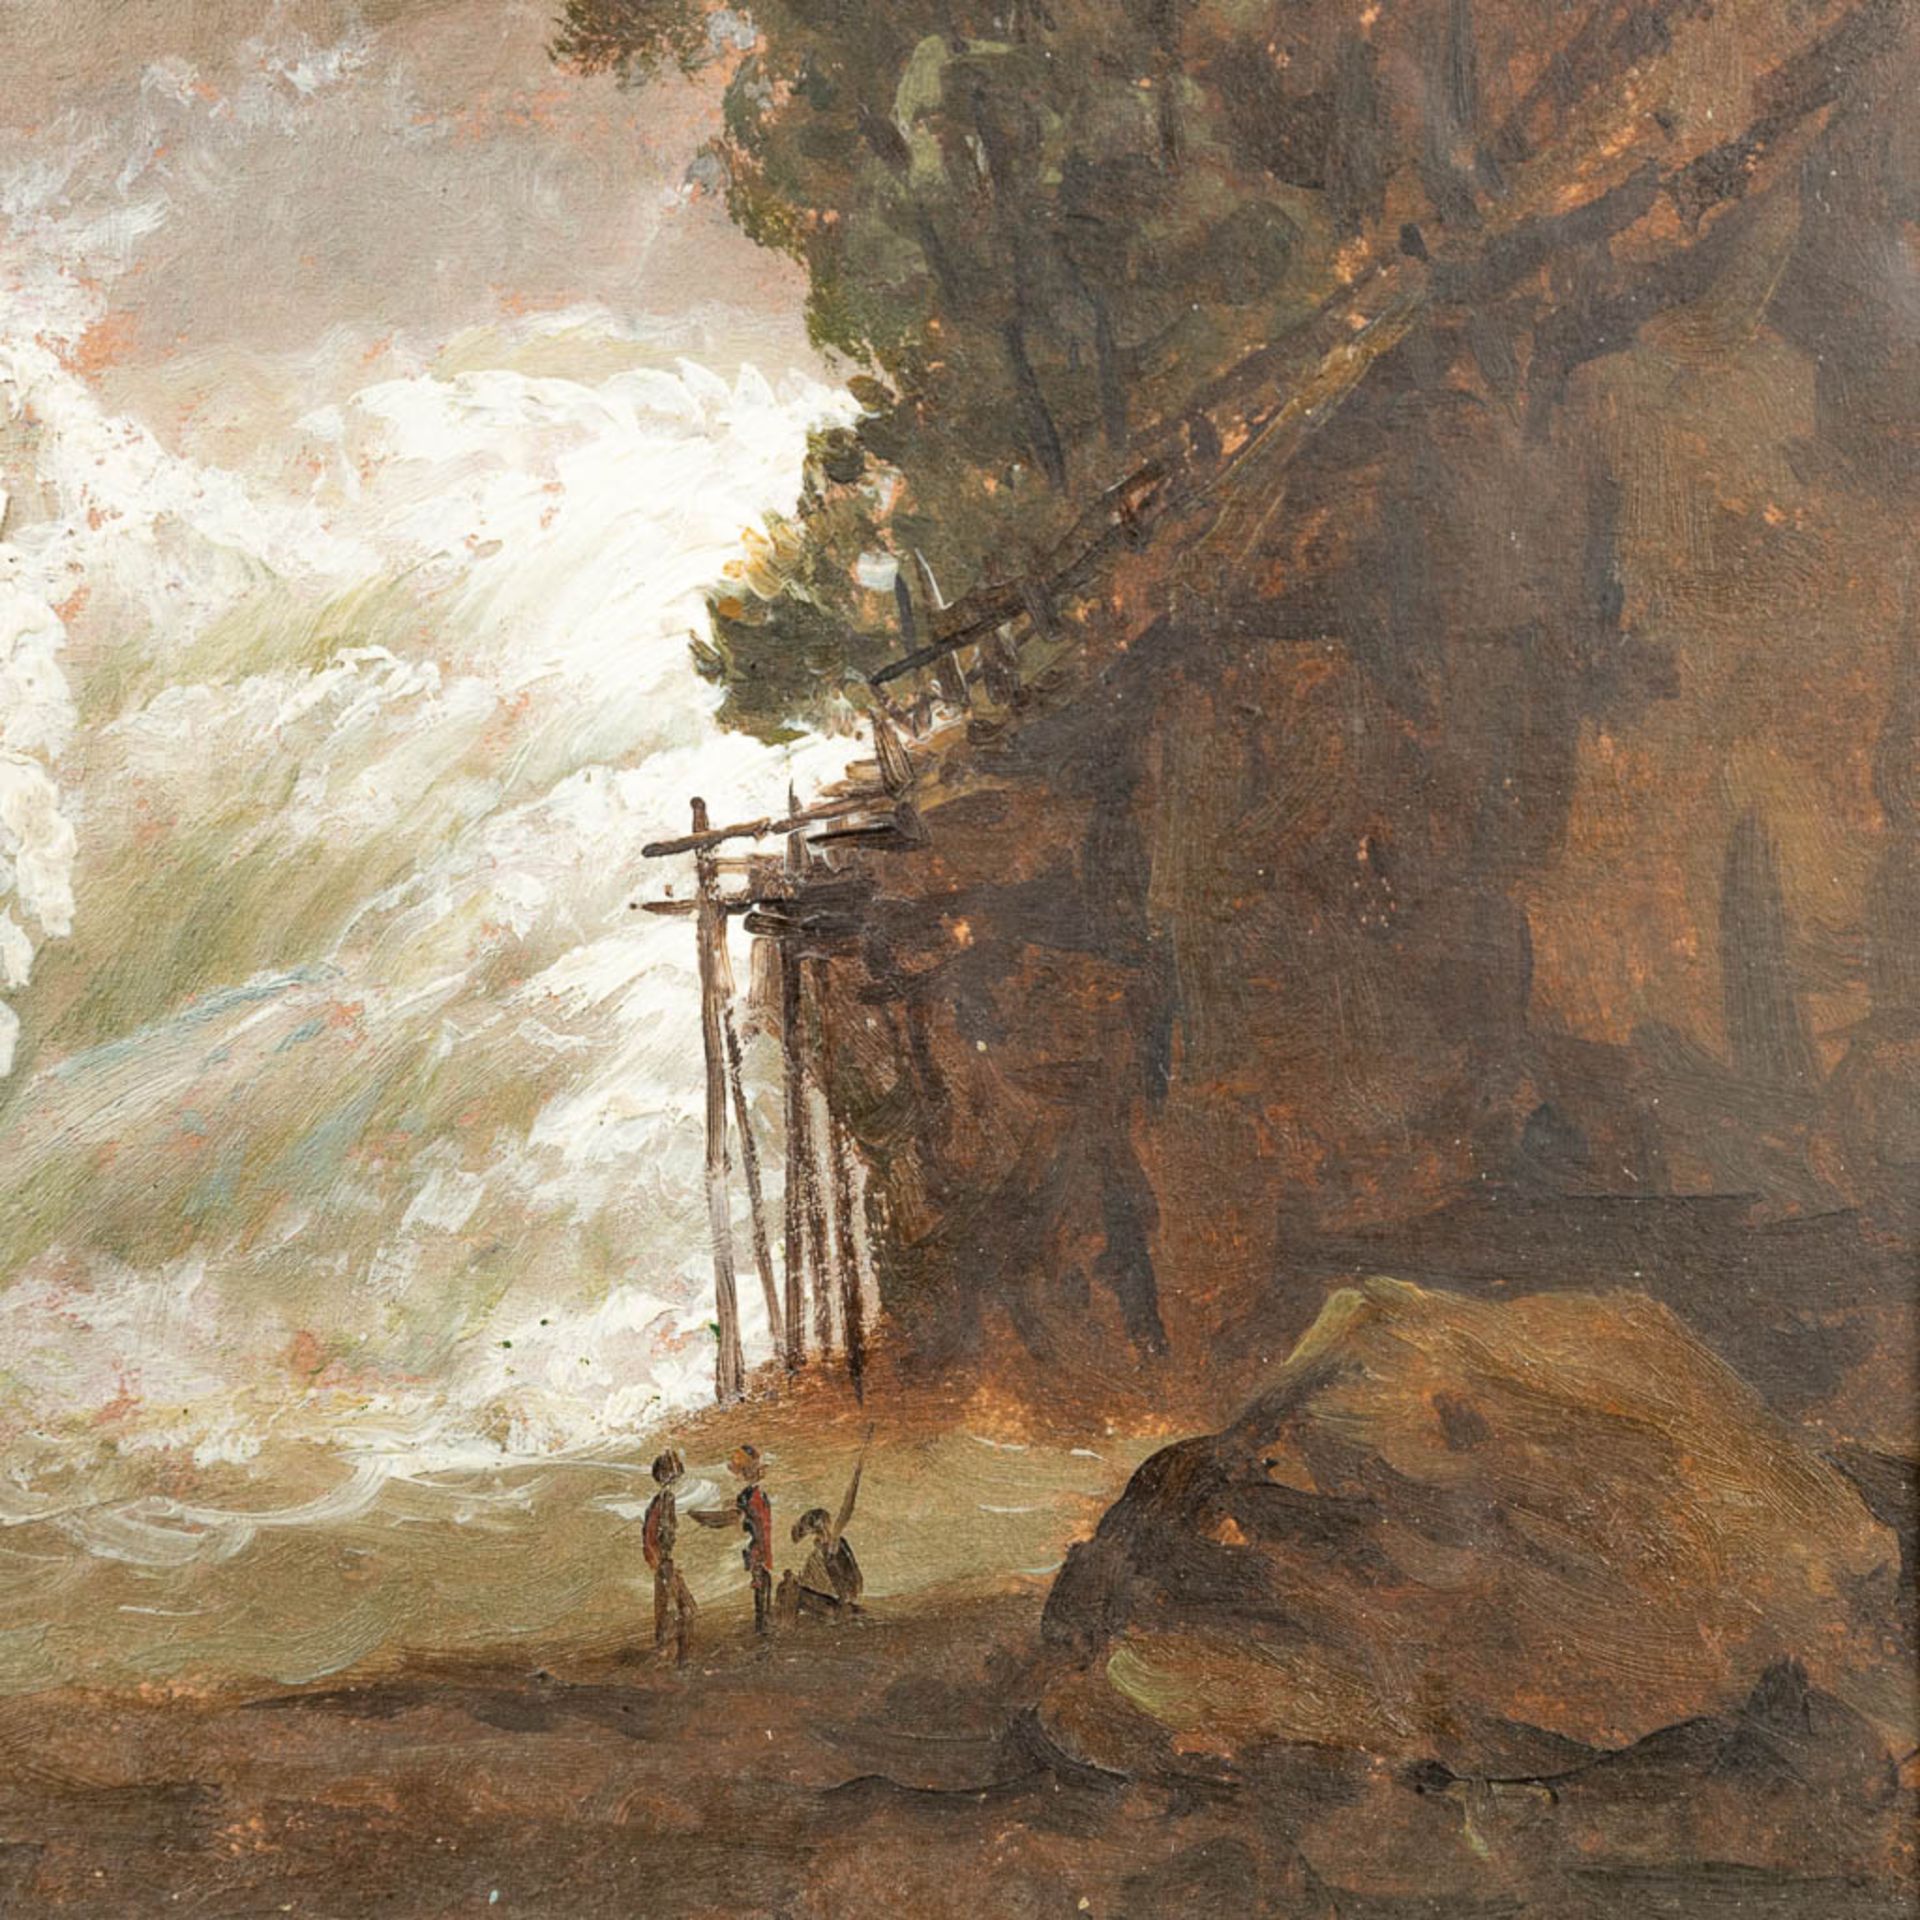 Henri VAN ASSCHE (1774-1841) 'The Waterfall' a painting, oil on paper. (26 x 20 cm) - Image 3 of 7